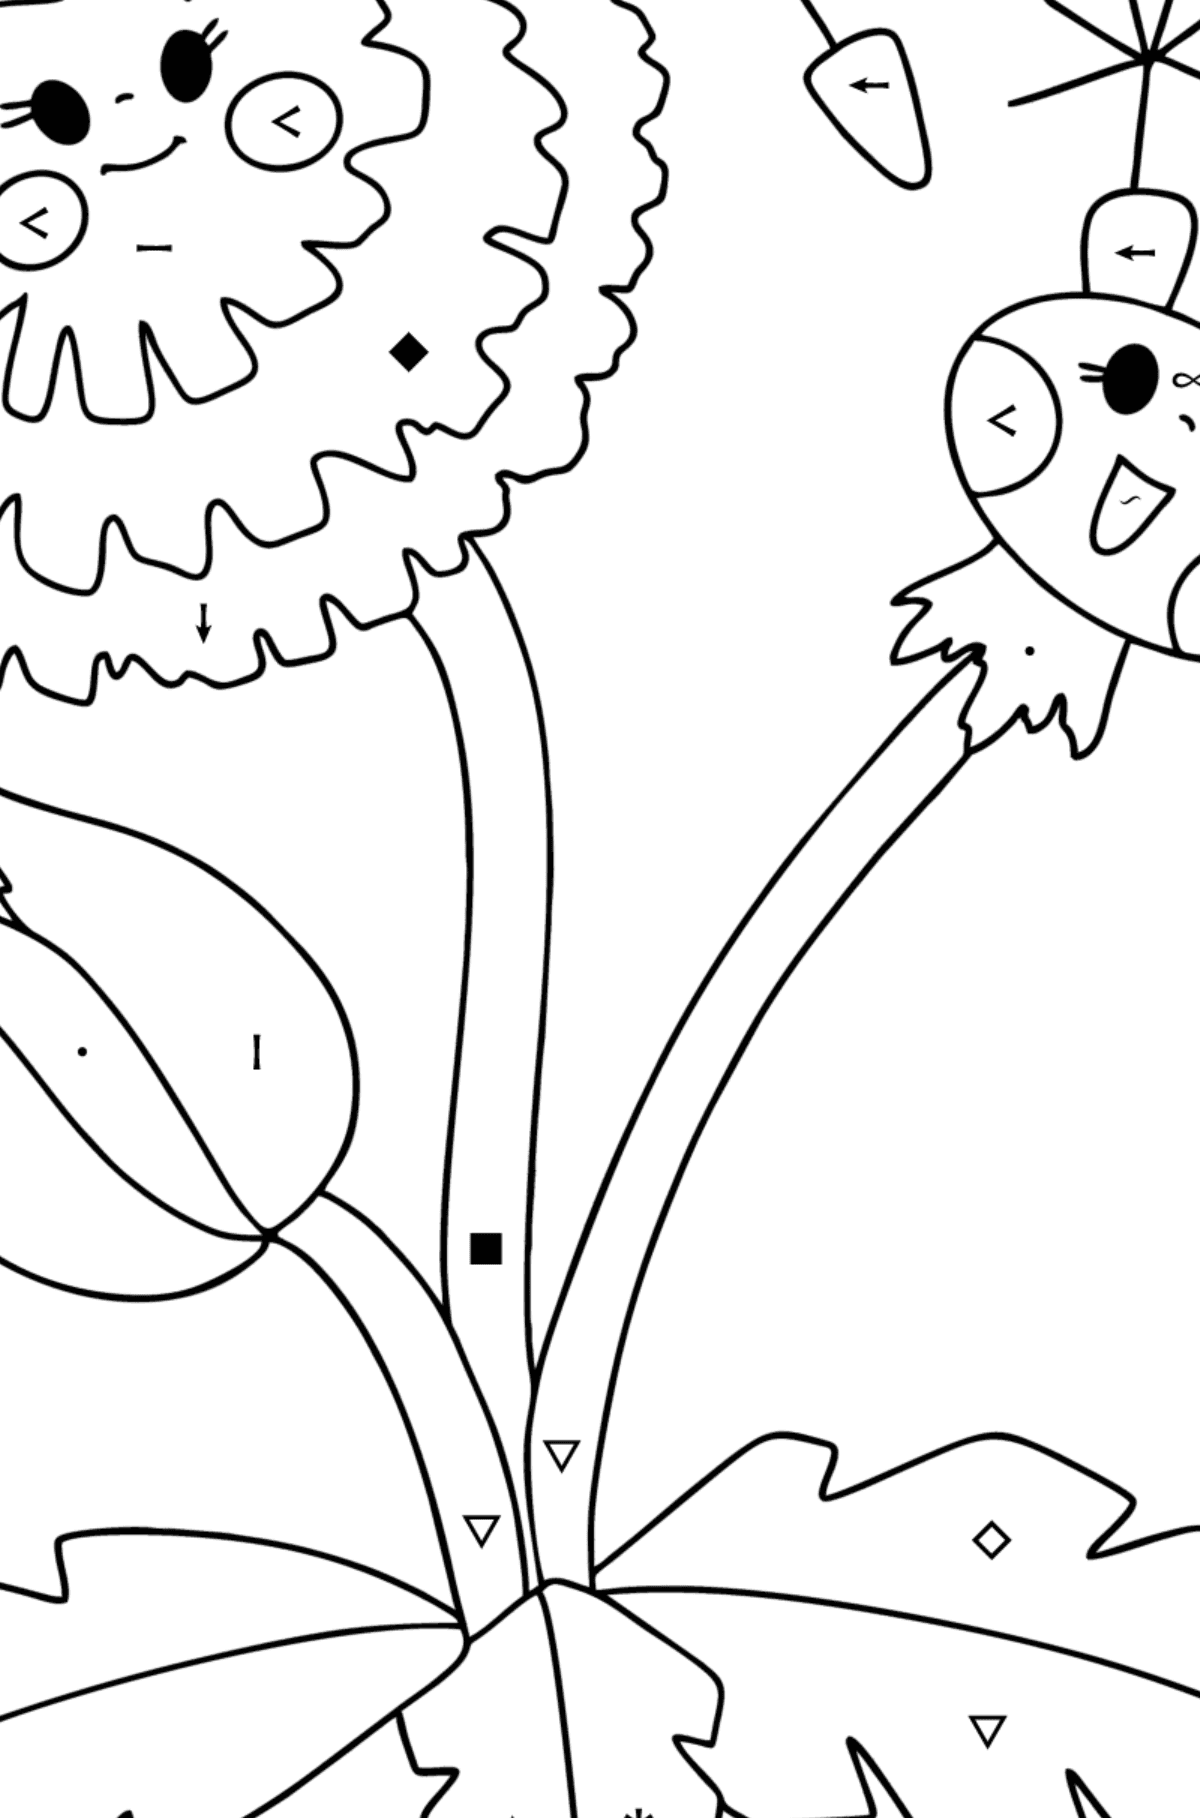 Dandelion with eyes coloring page - Coloring by Symbols for Kids